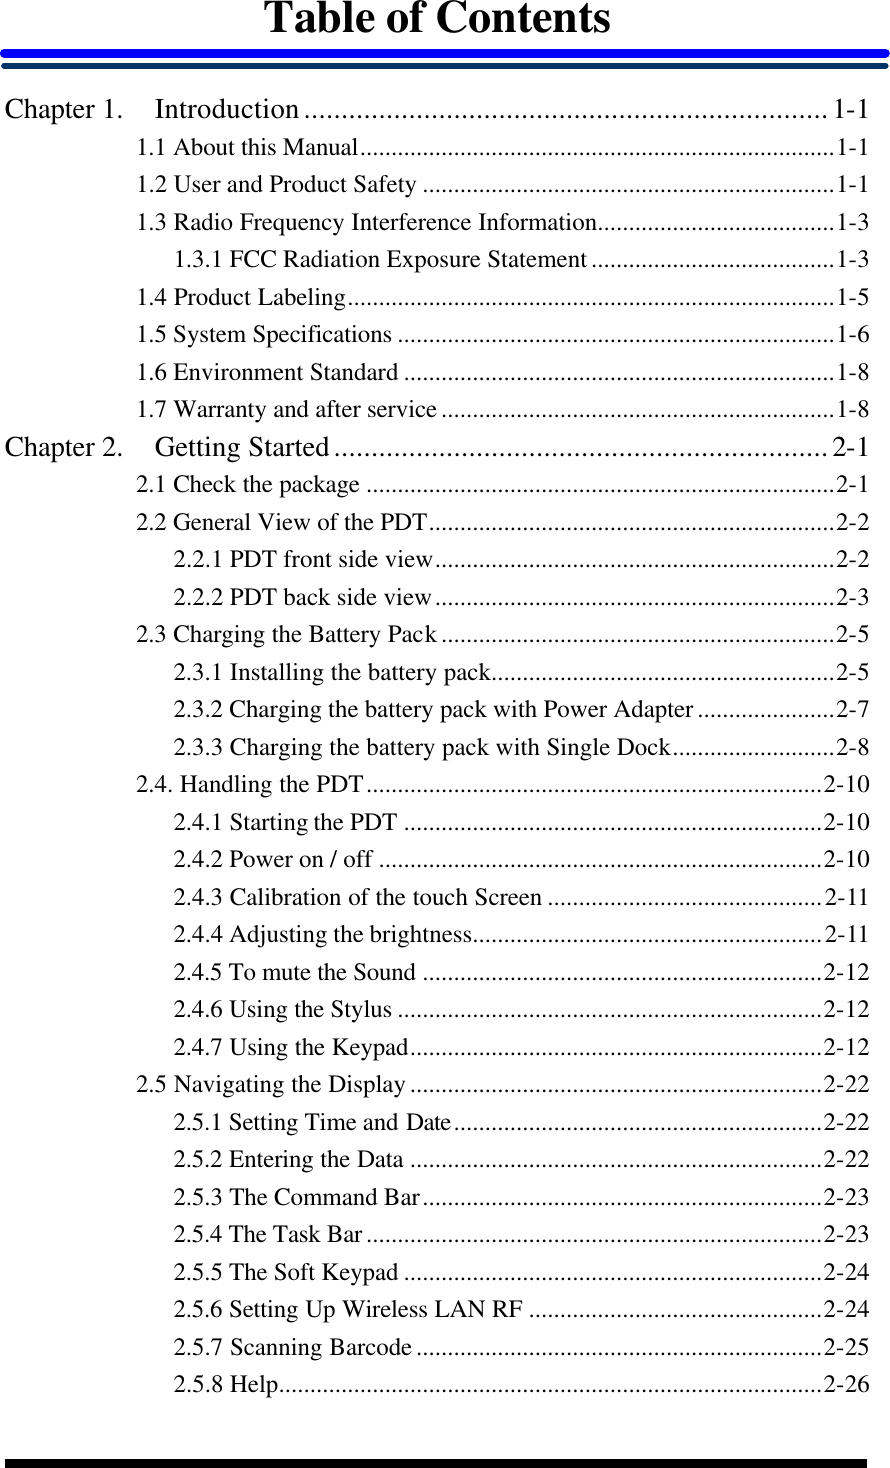  Table of Contents  Chapter 1. Introduction......................................................................1-1 1.1 About this Manual............................................................................1-1 1.2 User and Product Safety ..................................................................1-1 1.3 Radio Frequency Interference Information......................................1-3 1.3.1 FCC Radiation Exposure Statement.......................................1-3 1.4 Product Labeling..............................................................................1-5 1.5 System Specifications ......................................................................1-6 1.6 Environment Standard .....................................................................1-8 1.7 Warranty and after service...............................................................1-8 Chapter 2. Getting Started..................................................................2-1 2.1 Check the package ...........................................................................2-1 2.2 General View of the PDT.................................................................2-2 2.2.1 PDT front side view................................................................2-2 2.2.2 PDT back side view................................................................2-3 2.3 Charging the Battery Pack...............................................................2-5 2.3.1 Installing the battery pack.......................................................2-5 2.3.2 Charging the battery pack with Power Adapter......................2-7 2.3.3 Charging the battery pack with Single Dock..........................2-8 2.4. Handling the PDT.........................................................................2-10 2.4.1 Starting the PDT ...................................................................2-10 2.4.2 Power on / off .......................................................................2-10 2.4.3 Calibration of the touch Screen ............................................2-11 2.4.4 Adjusting the brightness........................................................2-11 2.4.5 To mute the Sound ................................................................2-12 2.4.6 Using the Stylus ....................................................................2-12 2.4.7 Using the Keypad..................................................................2-12 2.5 Navigating the Display..................................................................2-22 2.5.1 Setting Time and Date...........................................................2-22 2.5.2 Entering the Data ..................................................................2-22 2.5.3 The Command Bar................................................................2-23 2.5.4 The Task Bar.........................................................................2-23 2.5.5 The Soft Keypad ...................................................................2-24 2.5.6 Setting Up Wireless LAN RF ...............................................2-24 2.5.7 Scanning Barcode.................................................................2-25 2.5.8 Help.......................................................................................2-26 